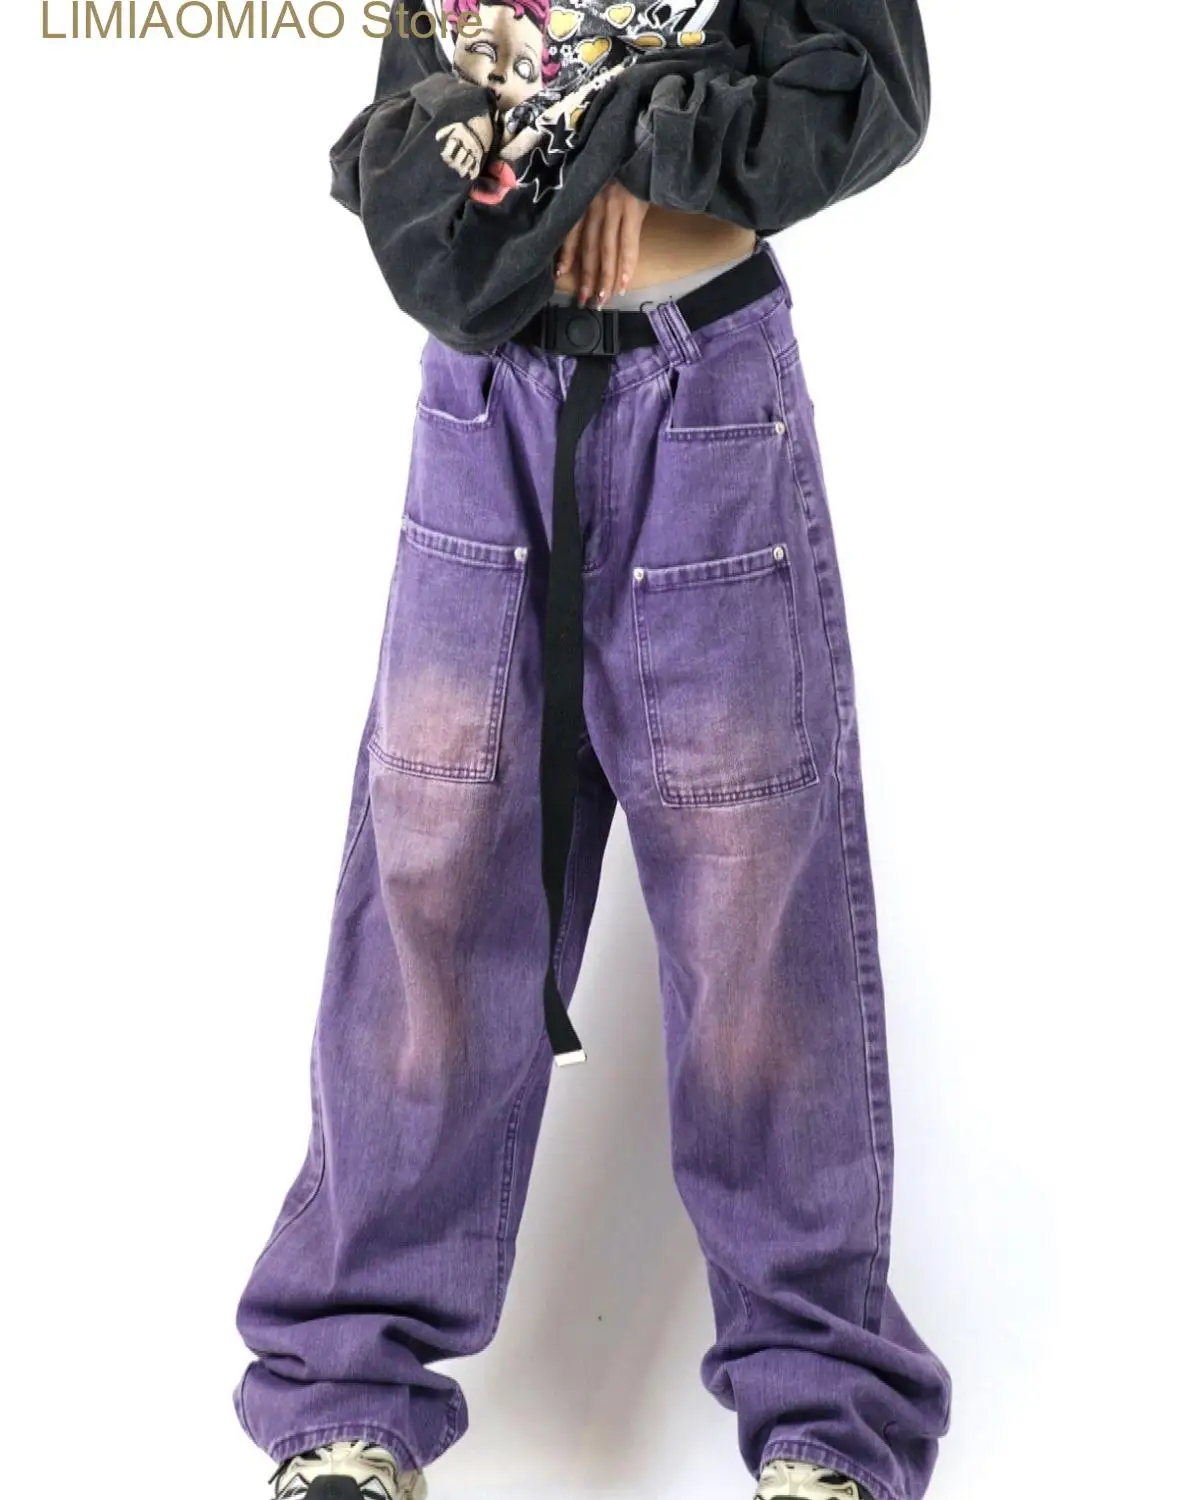 New Wide Leg Pants Denim Purple Straight Retro Ankle Length Cargo Jeans Loose Washed Distressed Pockets Zipper Women